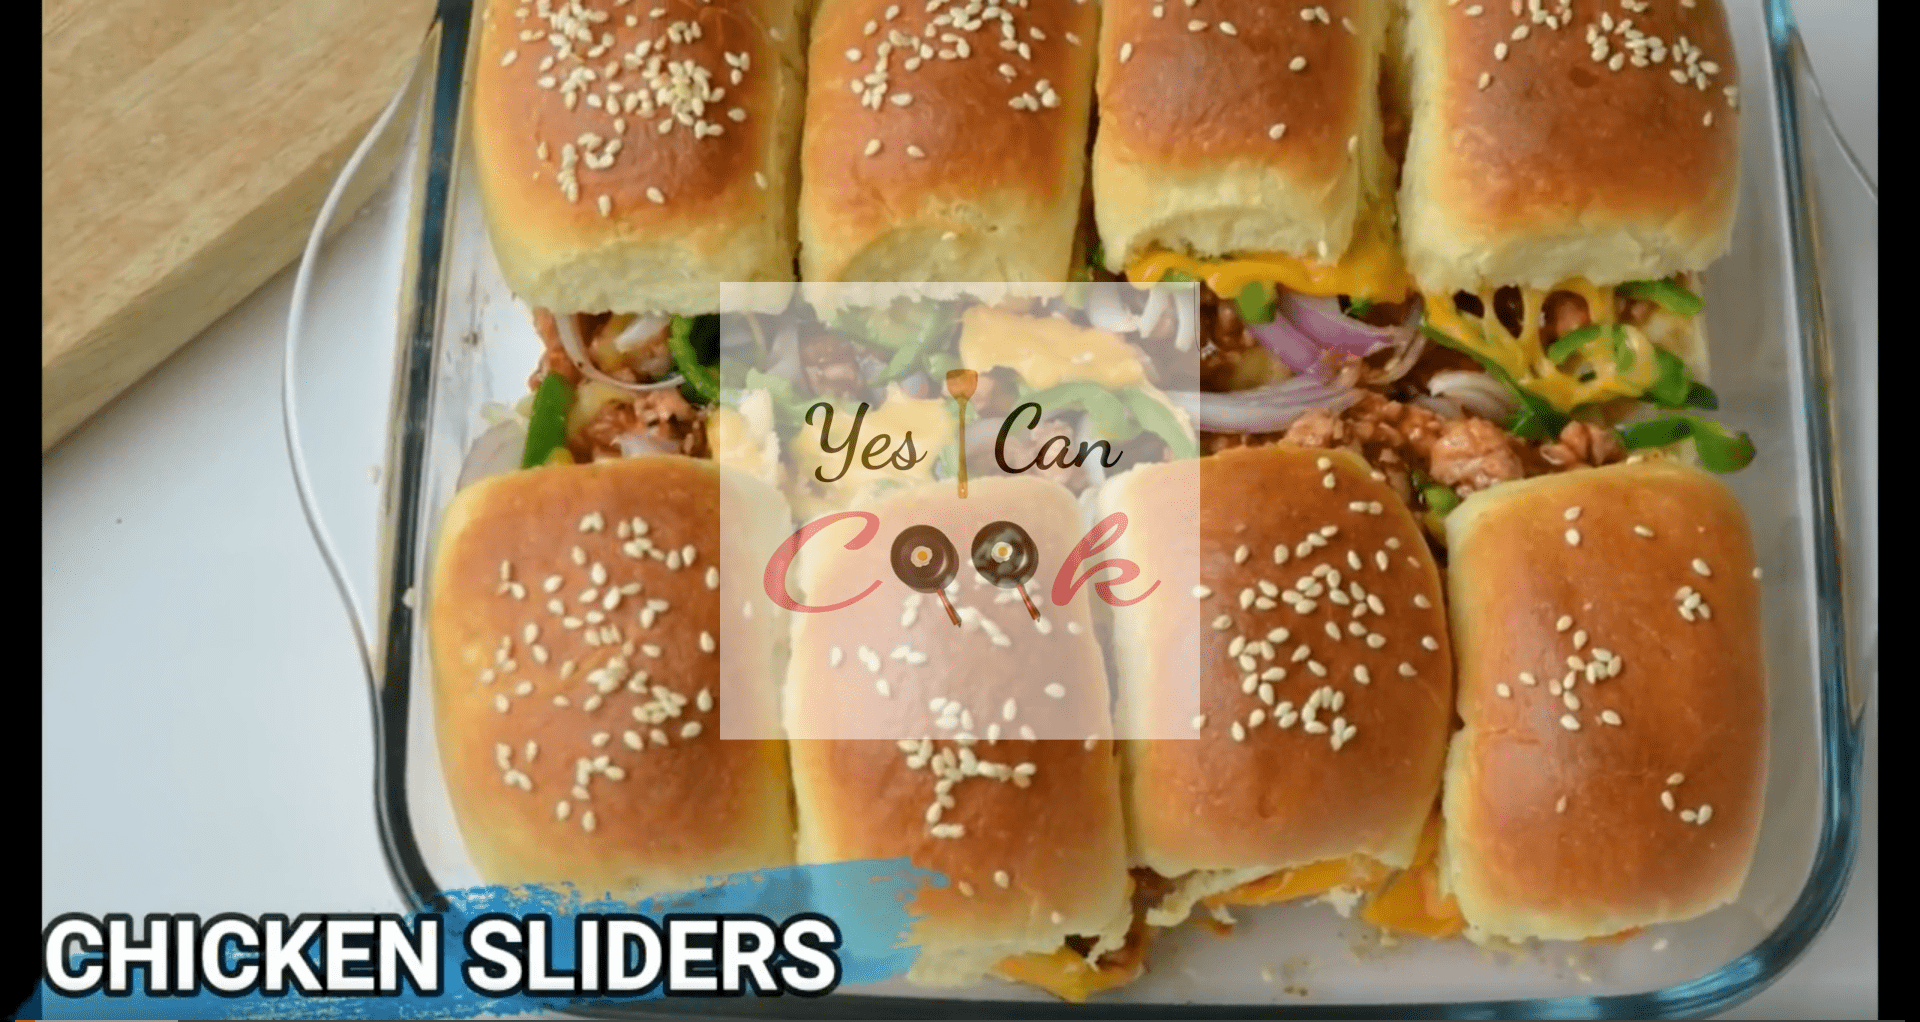 Chicken Cheese Sliders with home-made Buns